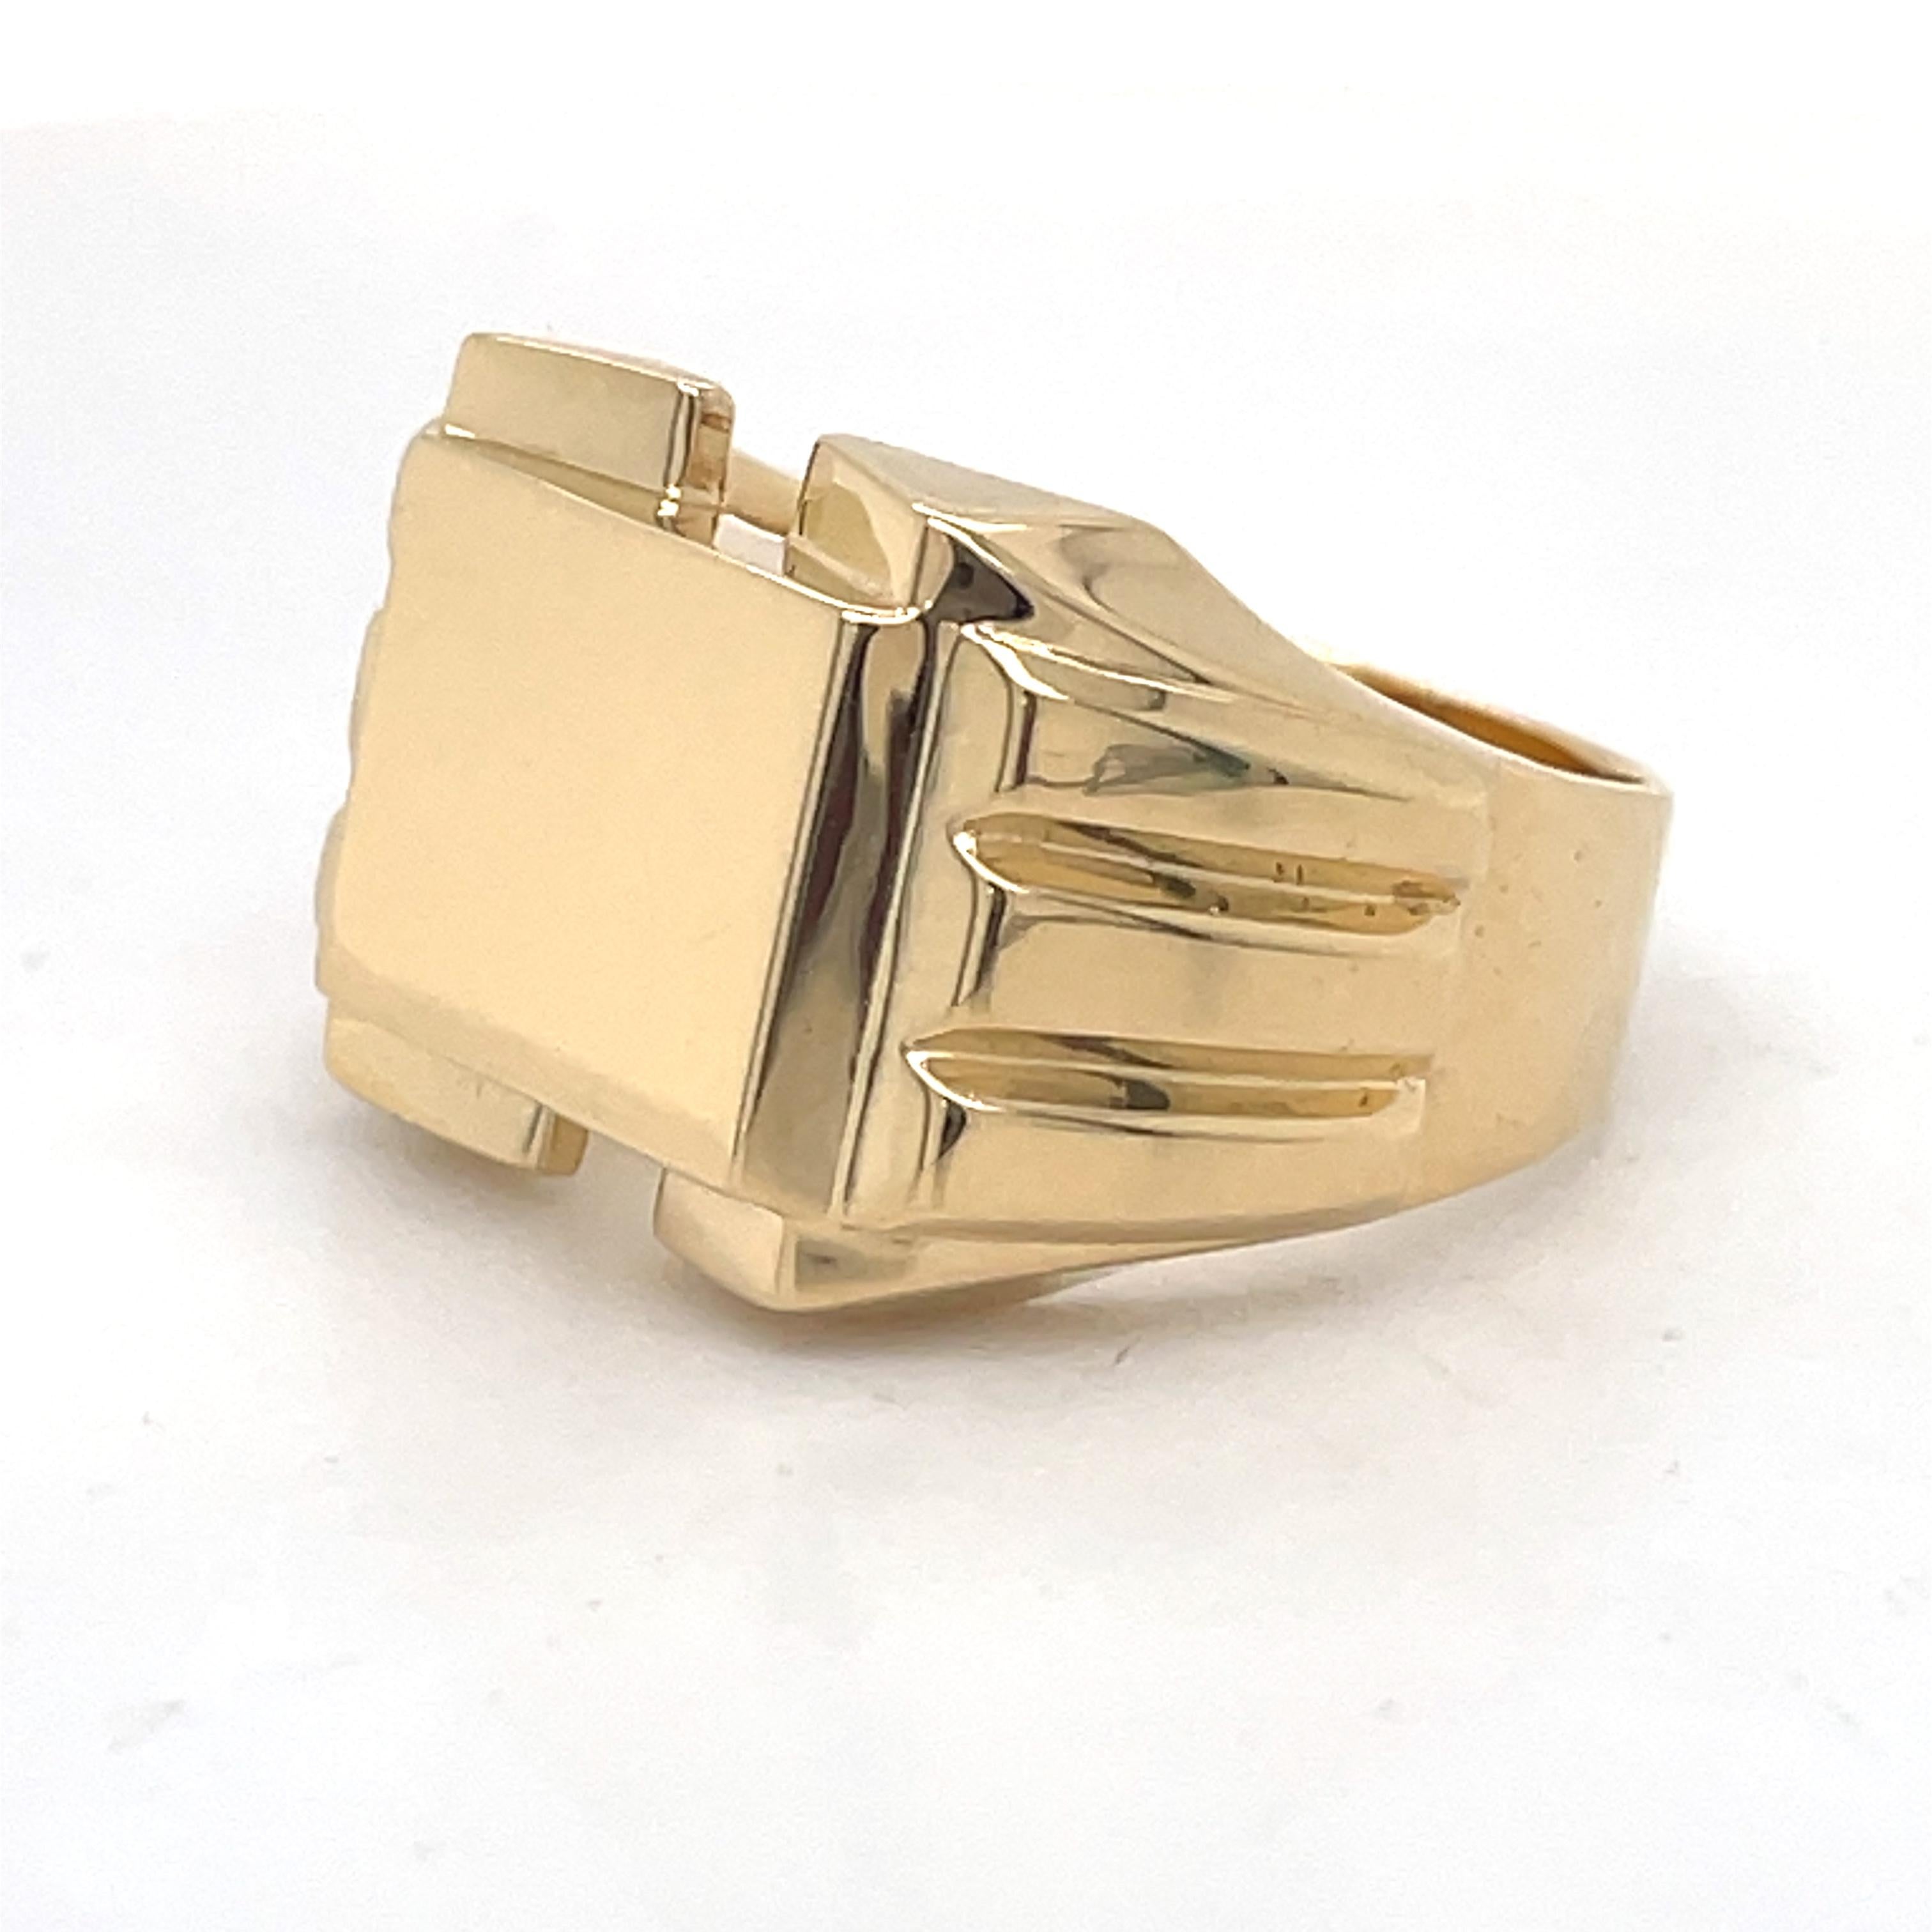 Unisex Gold Signet Ring, Vintage Style Ring, 14k Yellow Gold, made to order ring In New Condition For Sale In Ramat Gan, IL